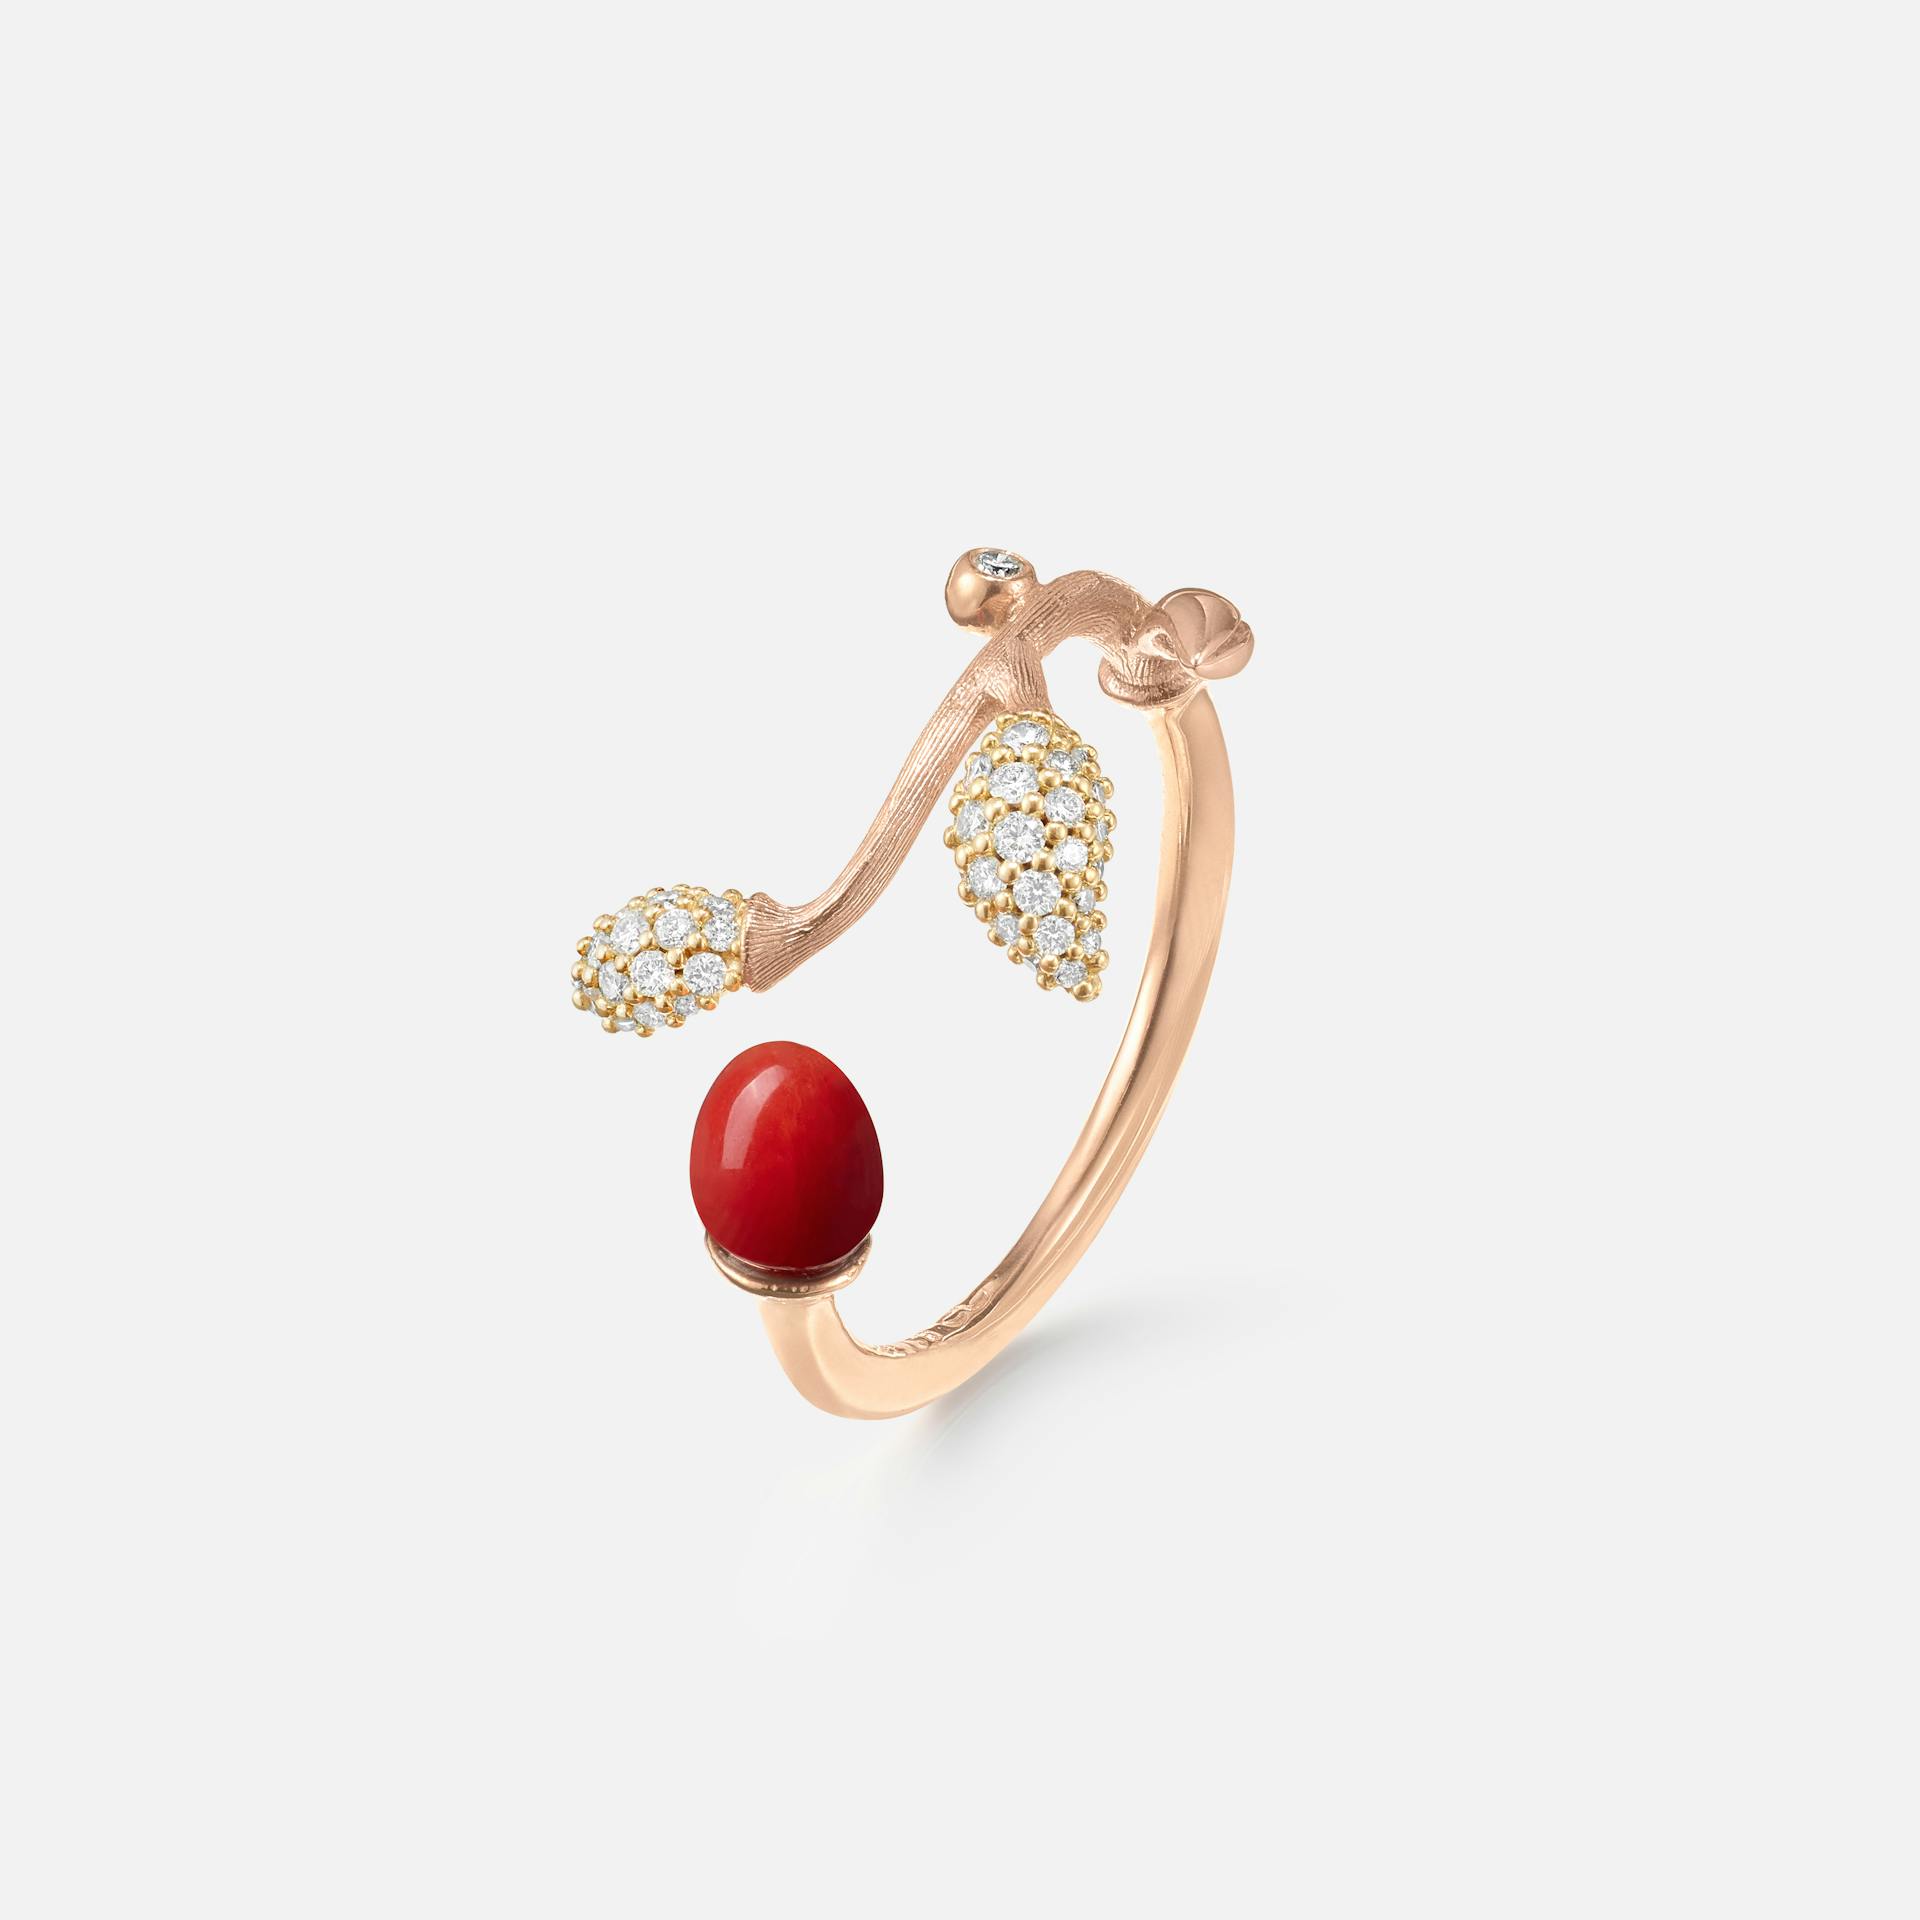 Blooming Ring in Gold with Diamonds & Red Coral  |  Ole Lynggaard Copenhagen  